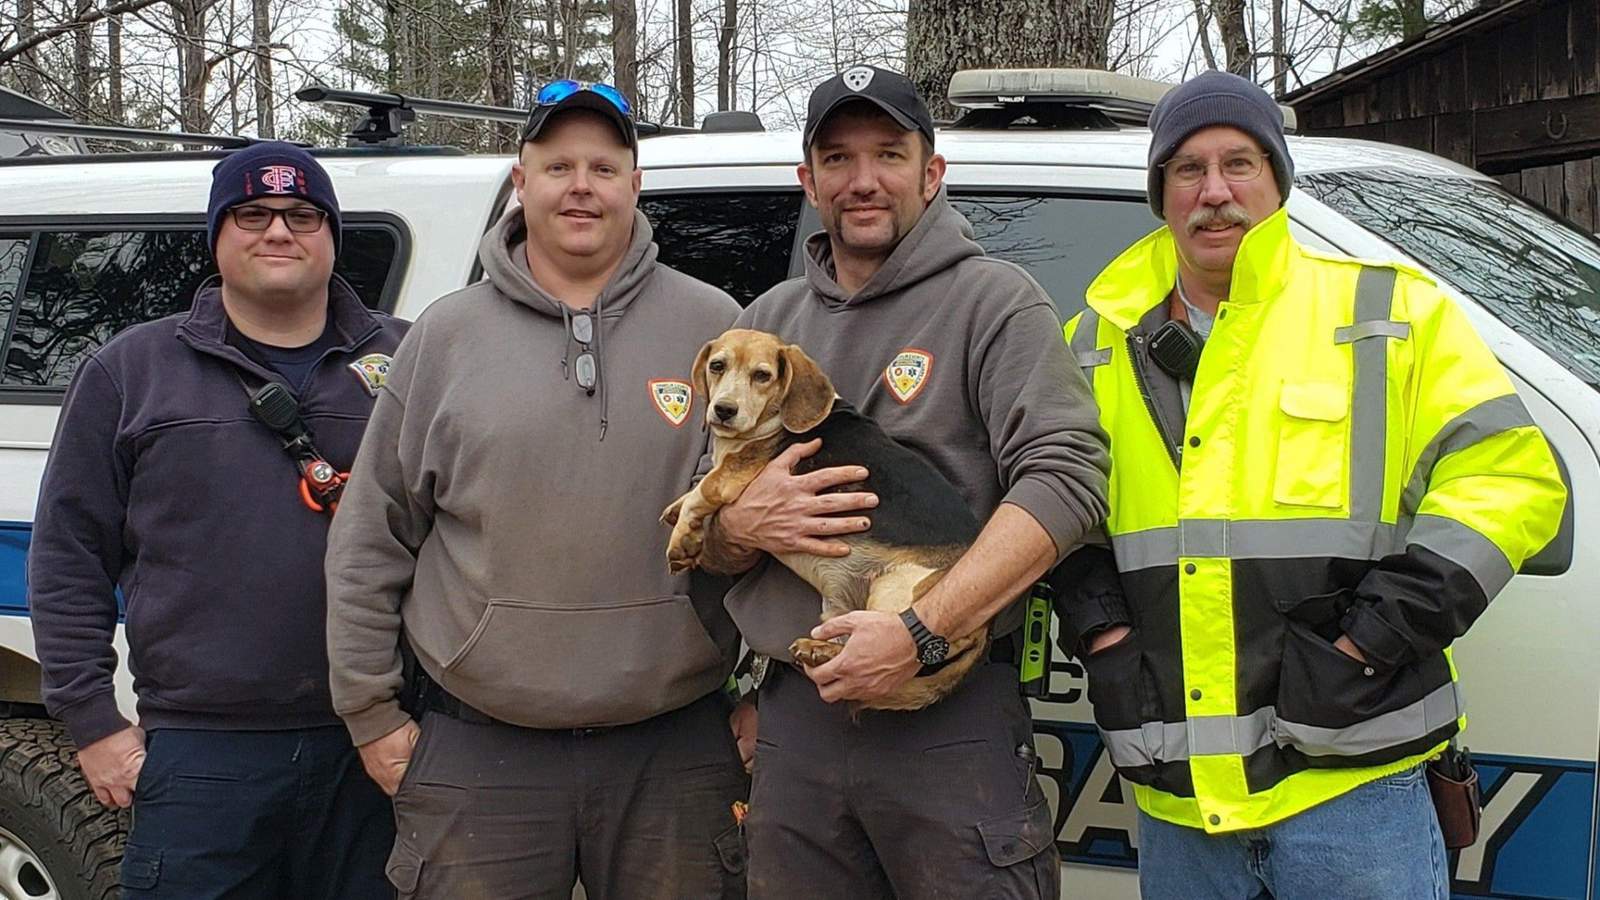 Franklin County dog rescue to be featured on A&E’s ‘Live Rescue’